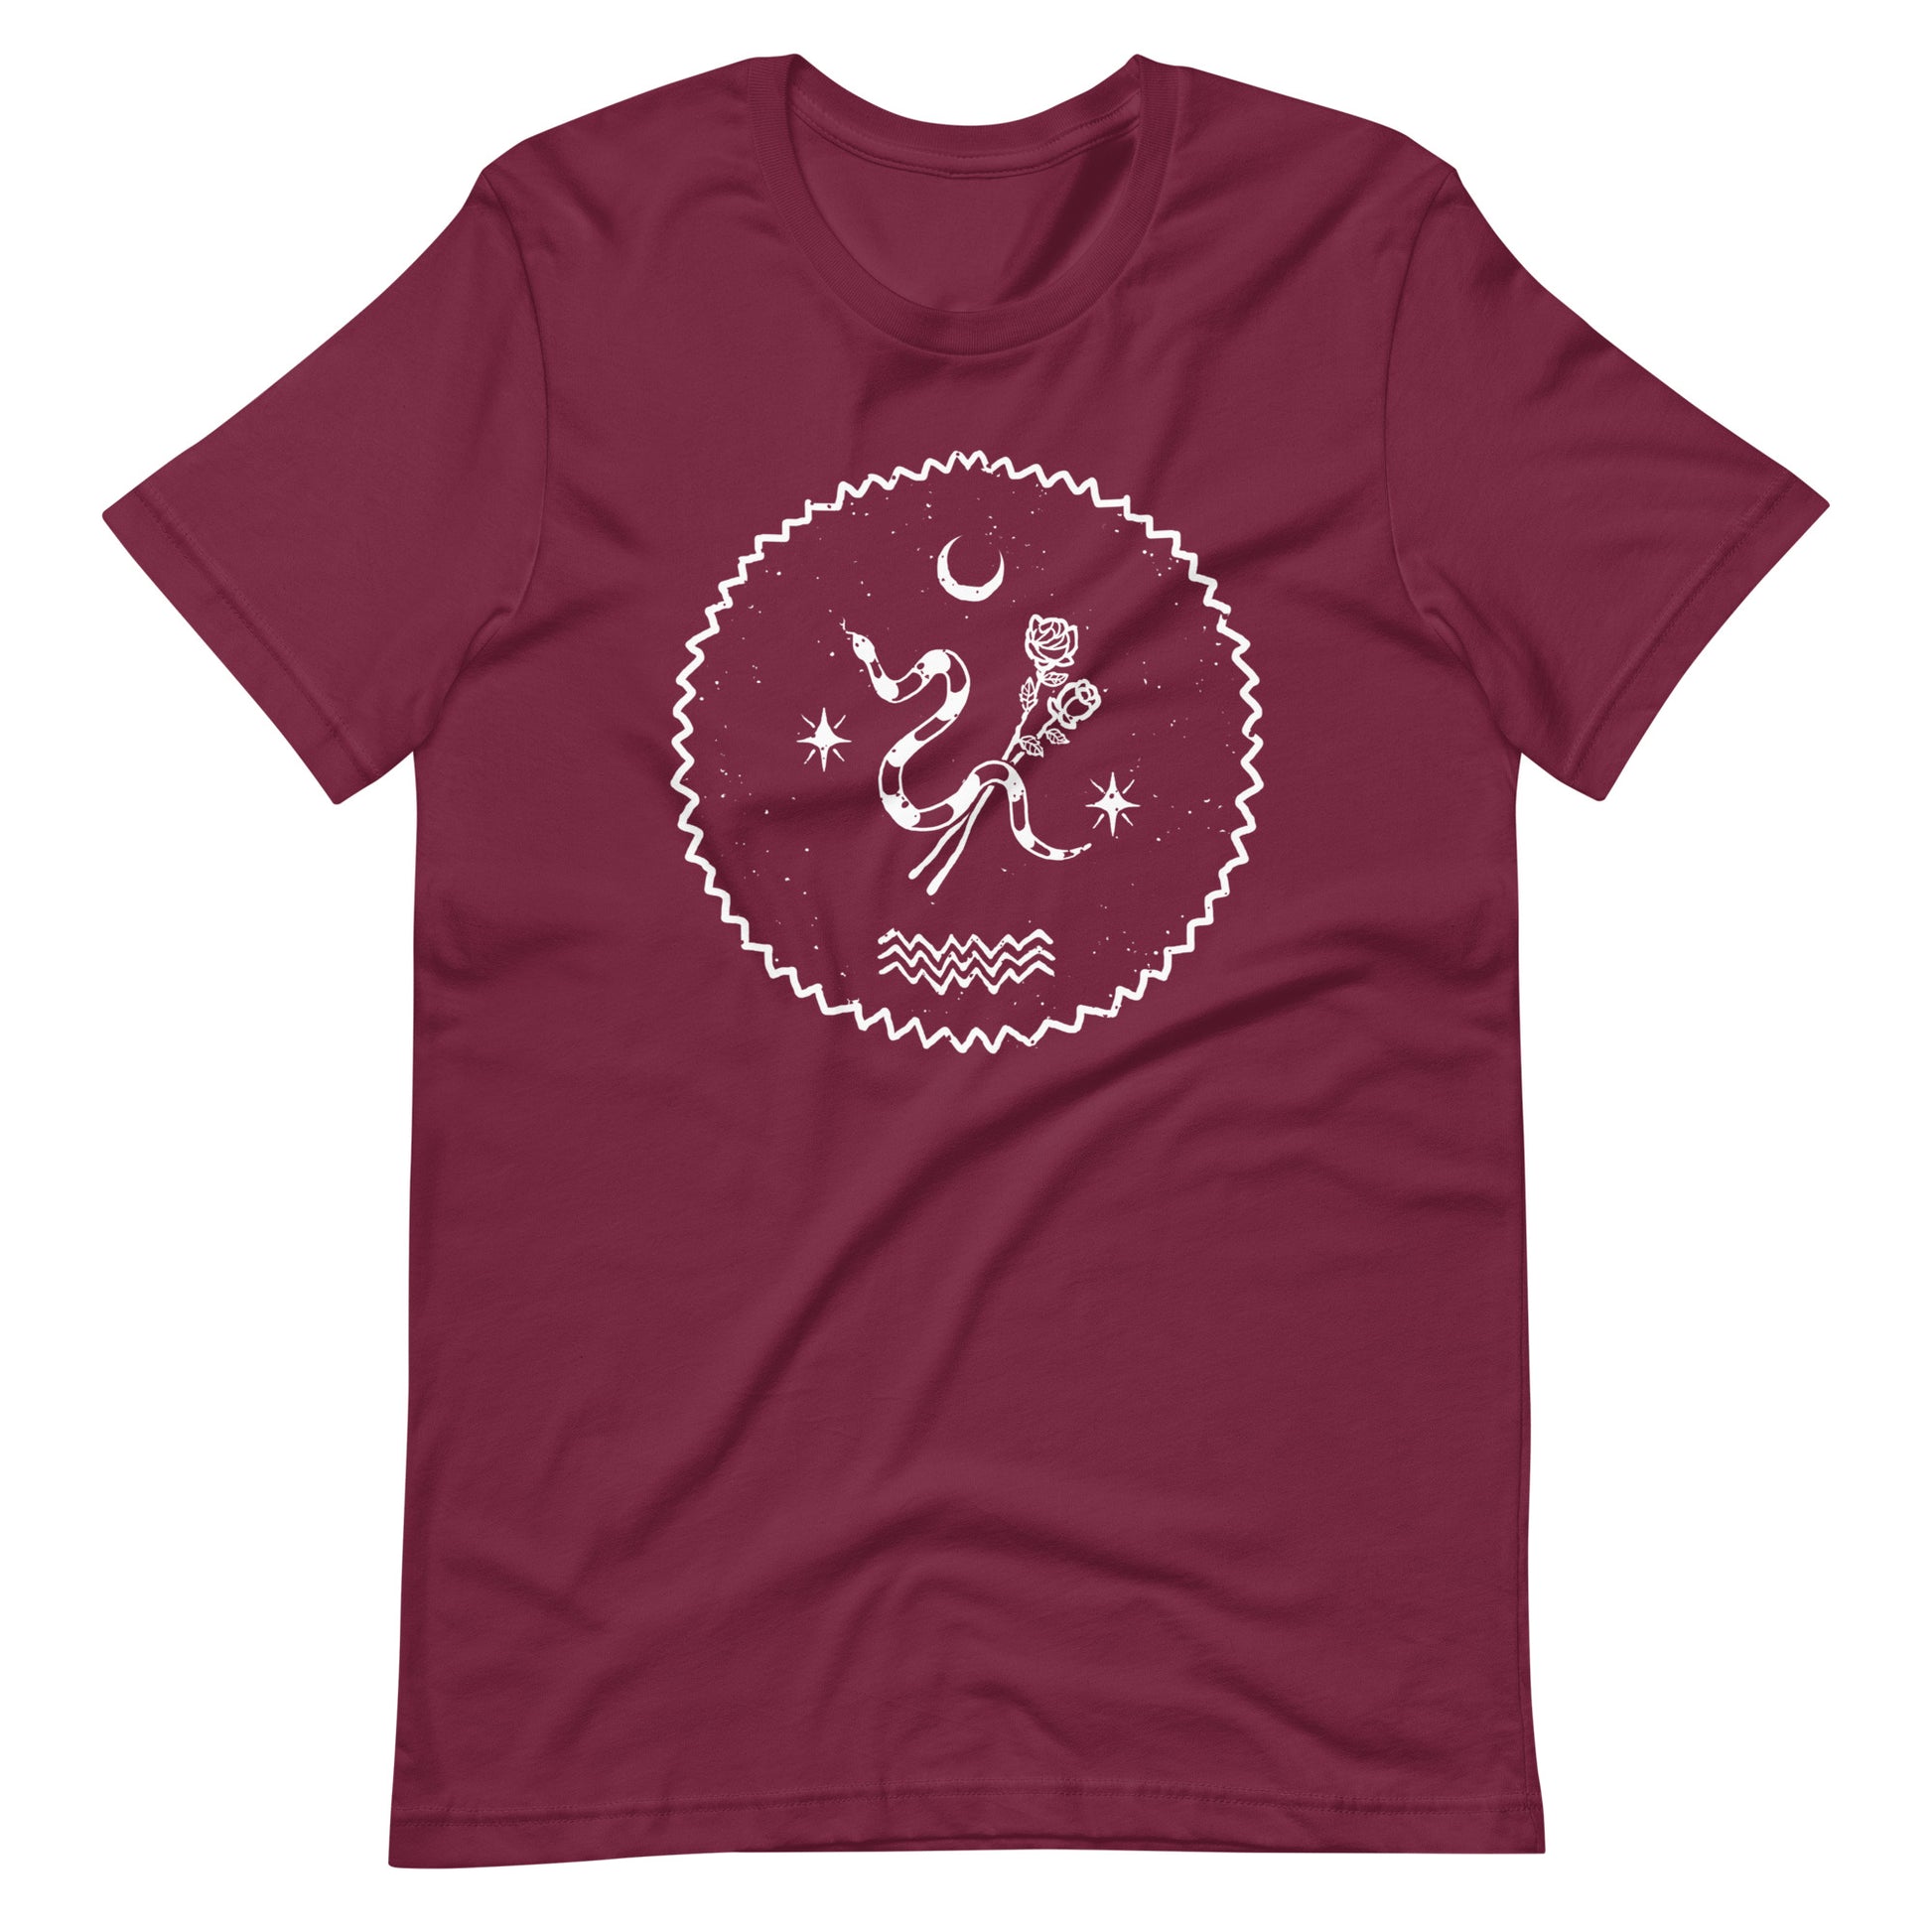 Scented Poison - Men's t-shirt - Maroon Front